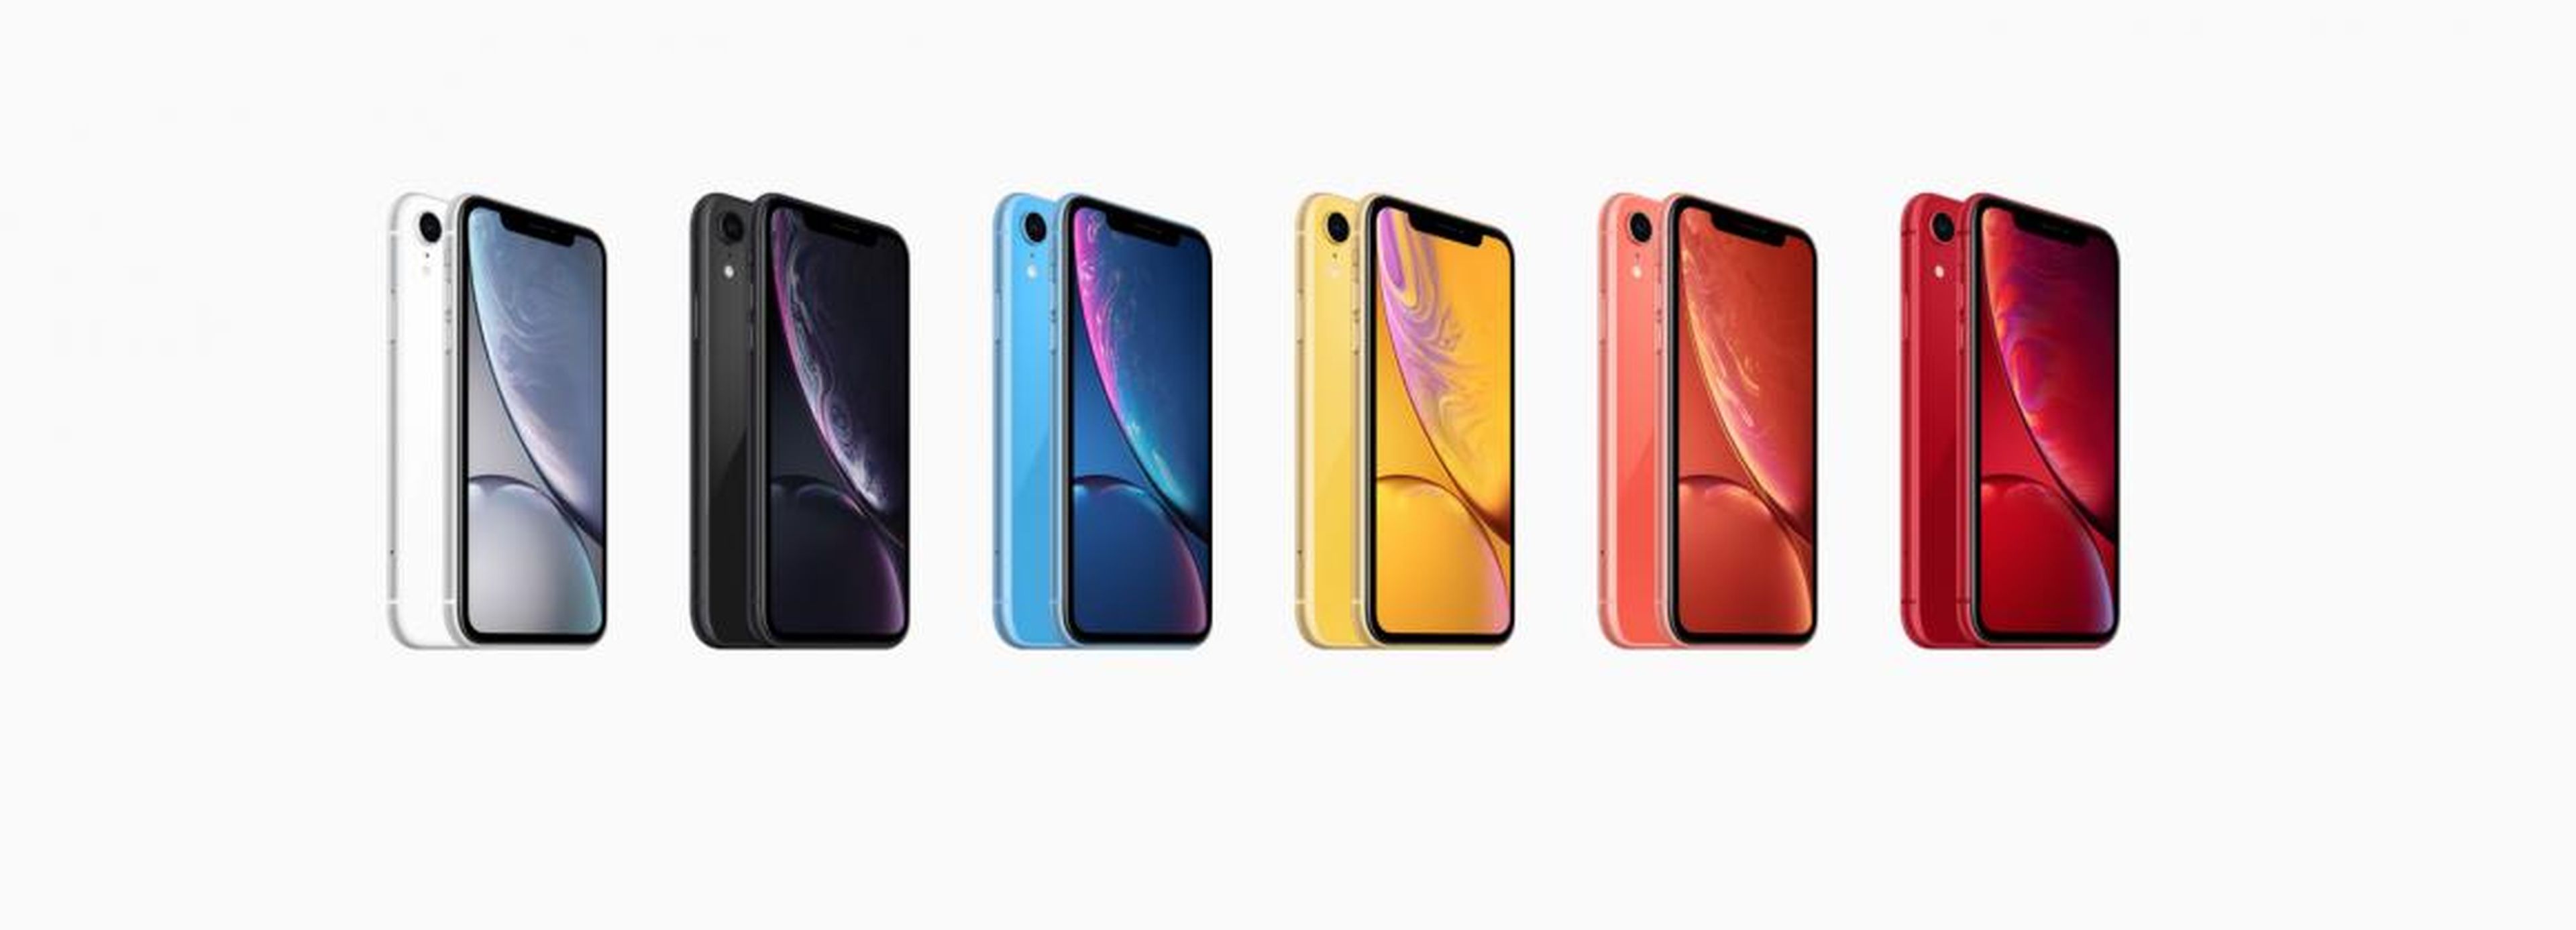 Apple seems to be having particular trouble selling its new iPhone XR devices.